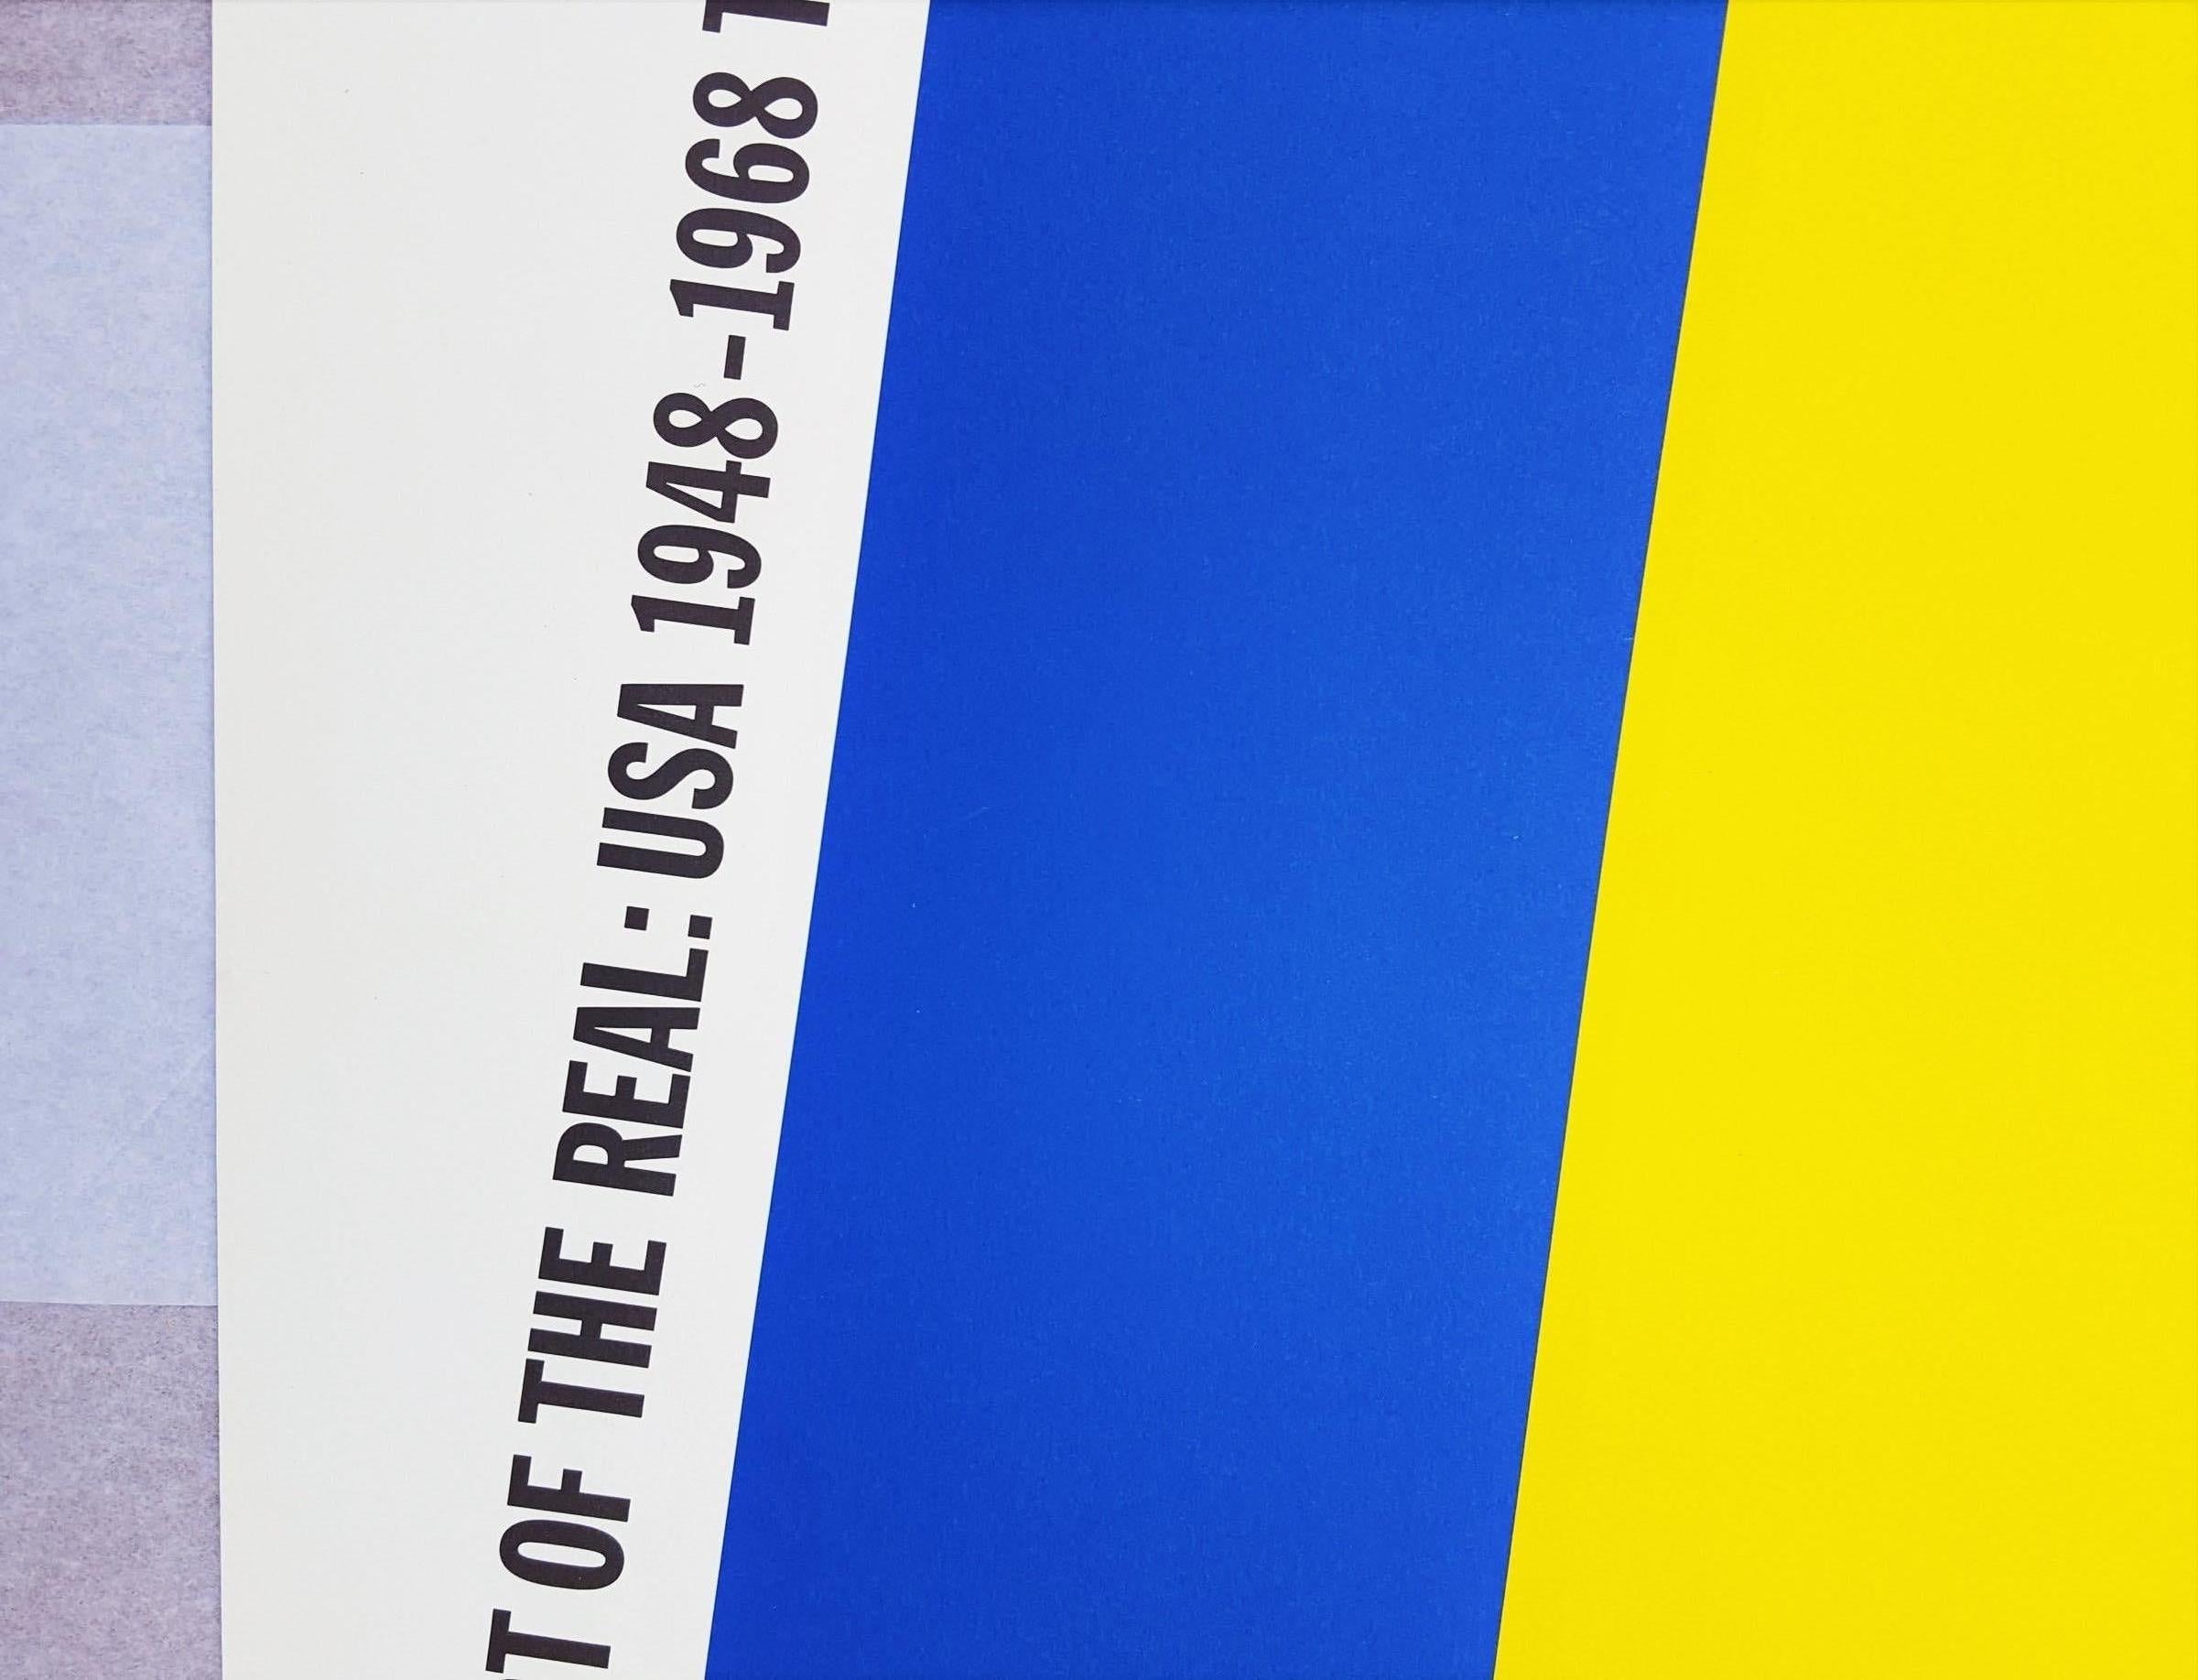 The Art of the Real: USA 1948-1968 (MoMA) - Minimalist Print by Ellsworth Kelly